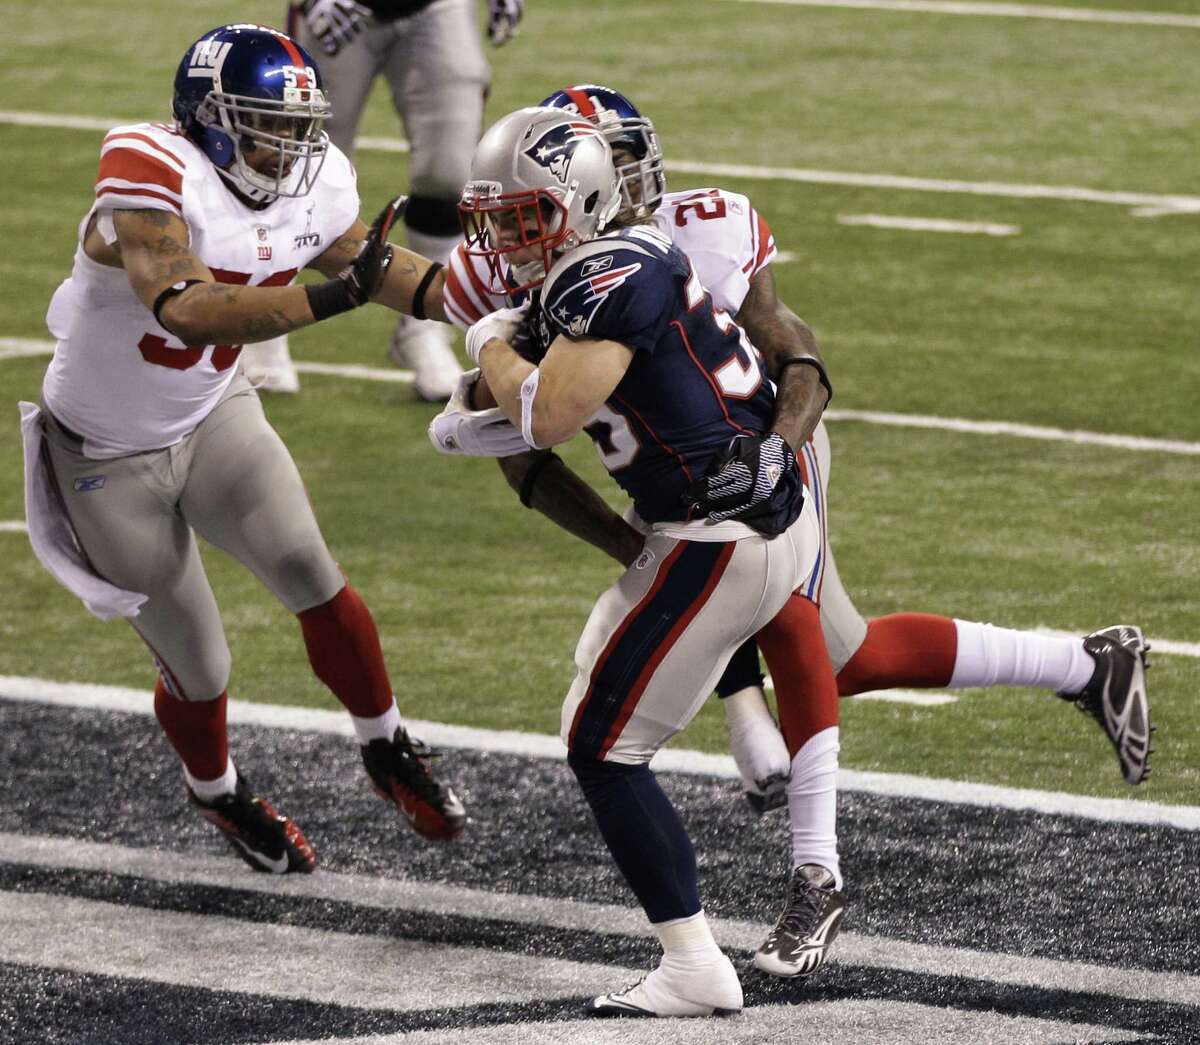 New England Patriots running back Danny Woodhead (39) scores a touchdown as New York Giants Michael Boley (59) and Kenny Phillips (21) fail to stop him during the first half of their NFL Super Bowl XLVI football game, Sunday, Feb. 5, 2012, in Indianapolis. (AP Photo/Elise Amendola)